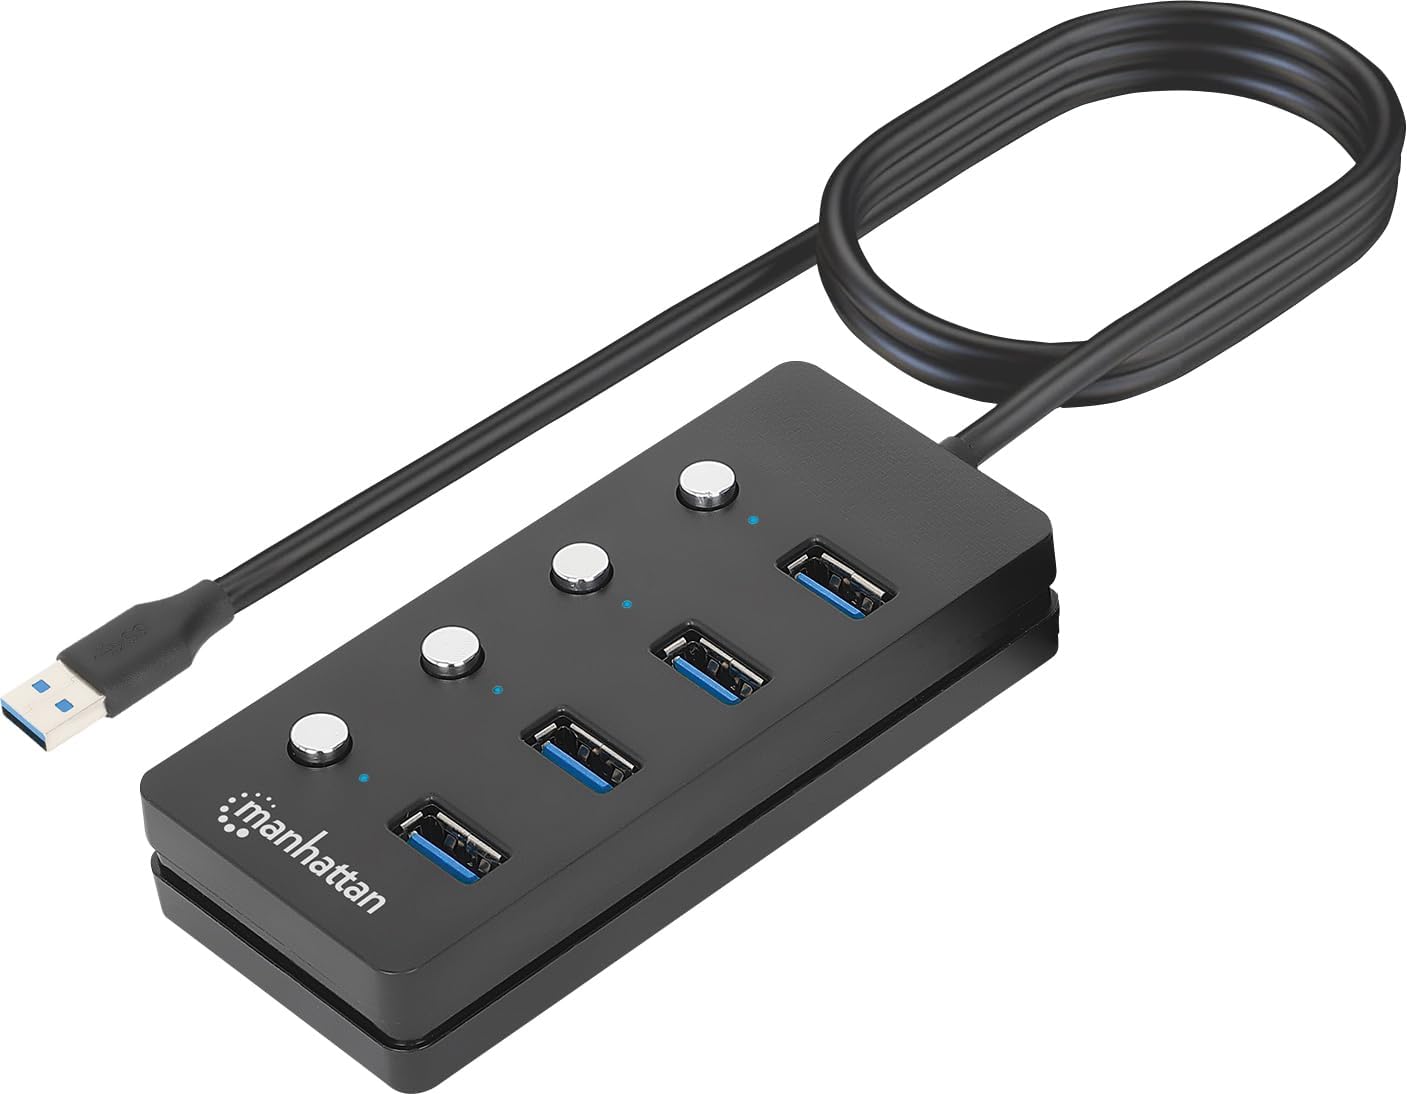 4-Port USB 3.0 Type-A Hub with 5 ft. Cable and On/Off Switch for Each Port